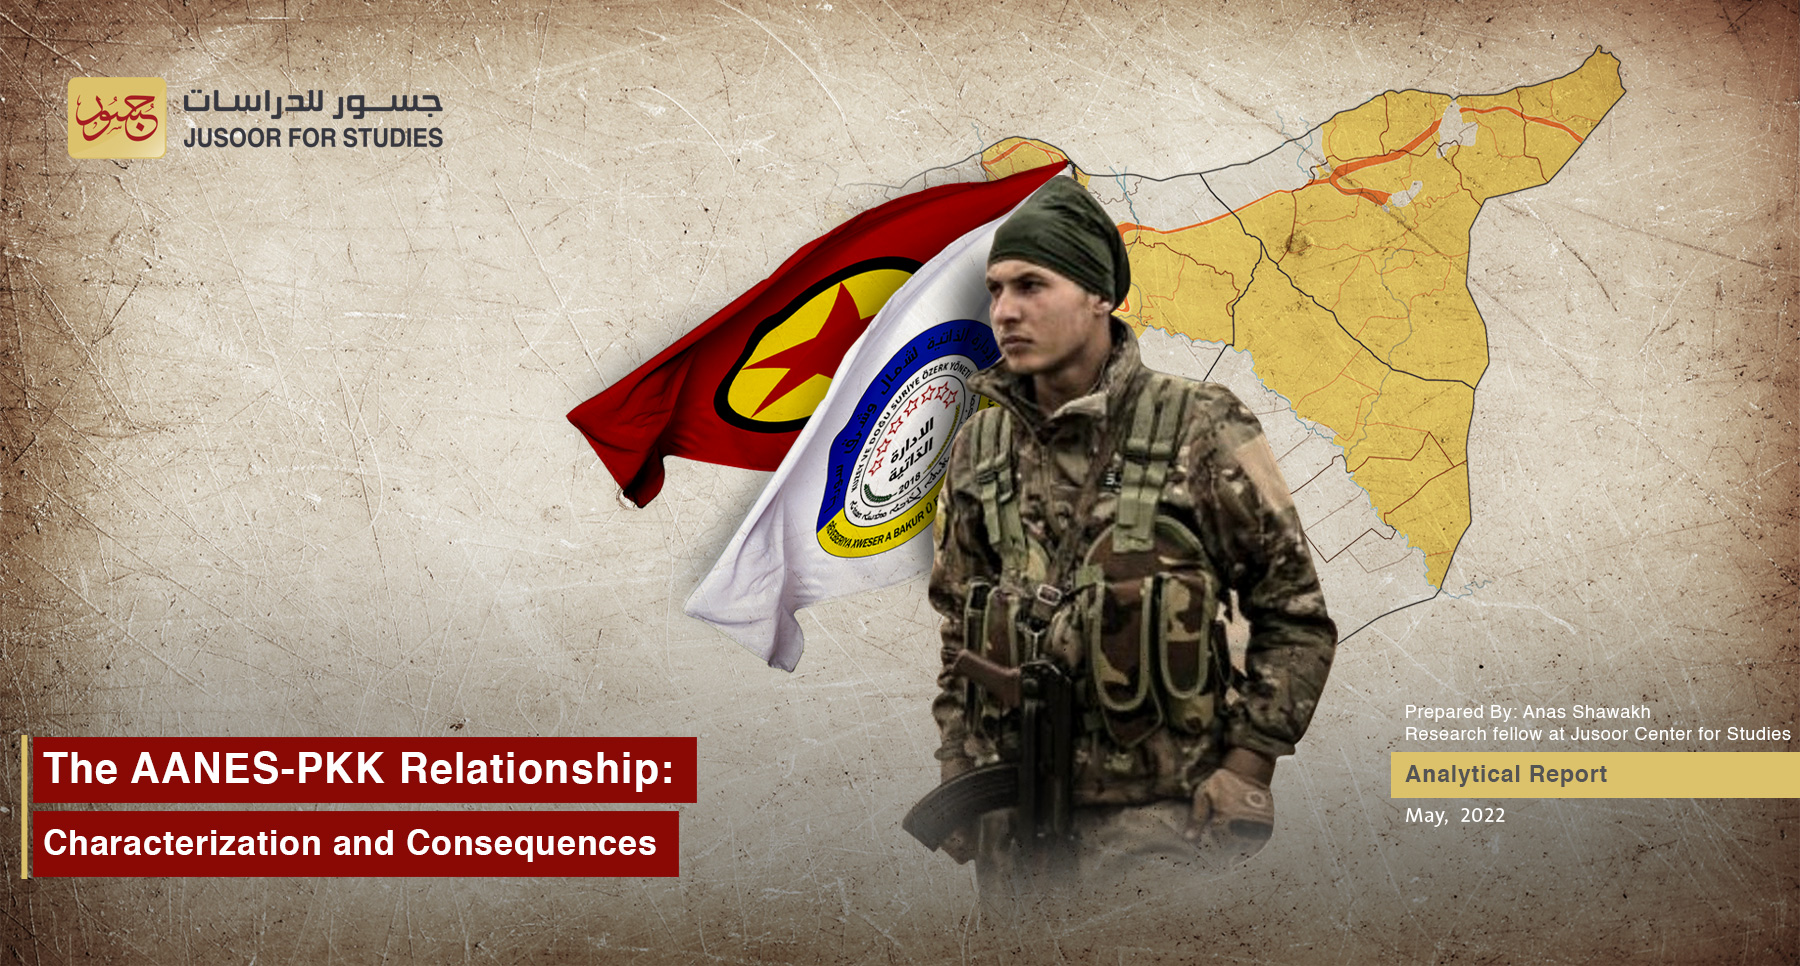 The AANES-PKK Relationship: Characterization and Consequences